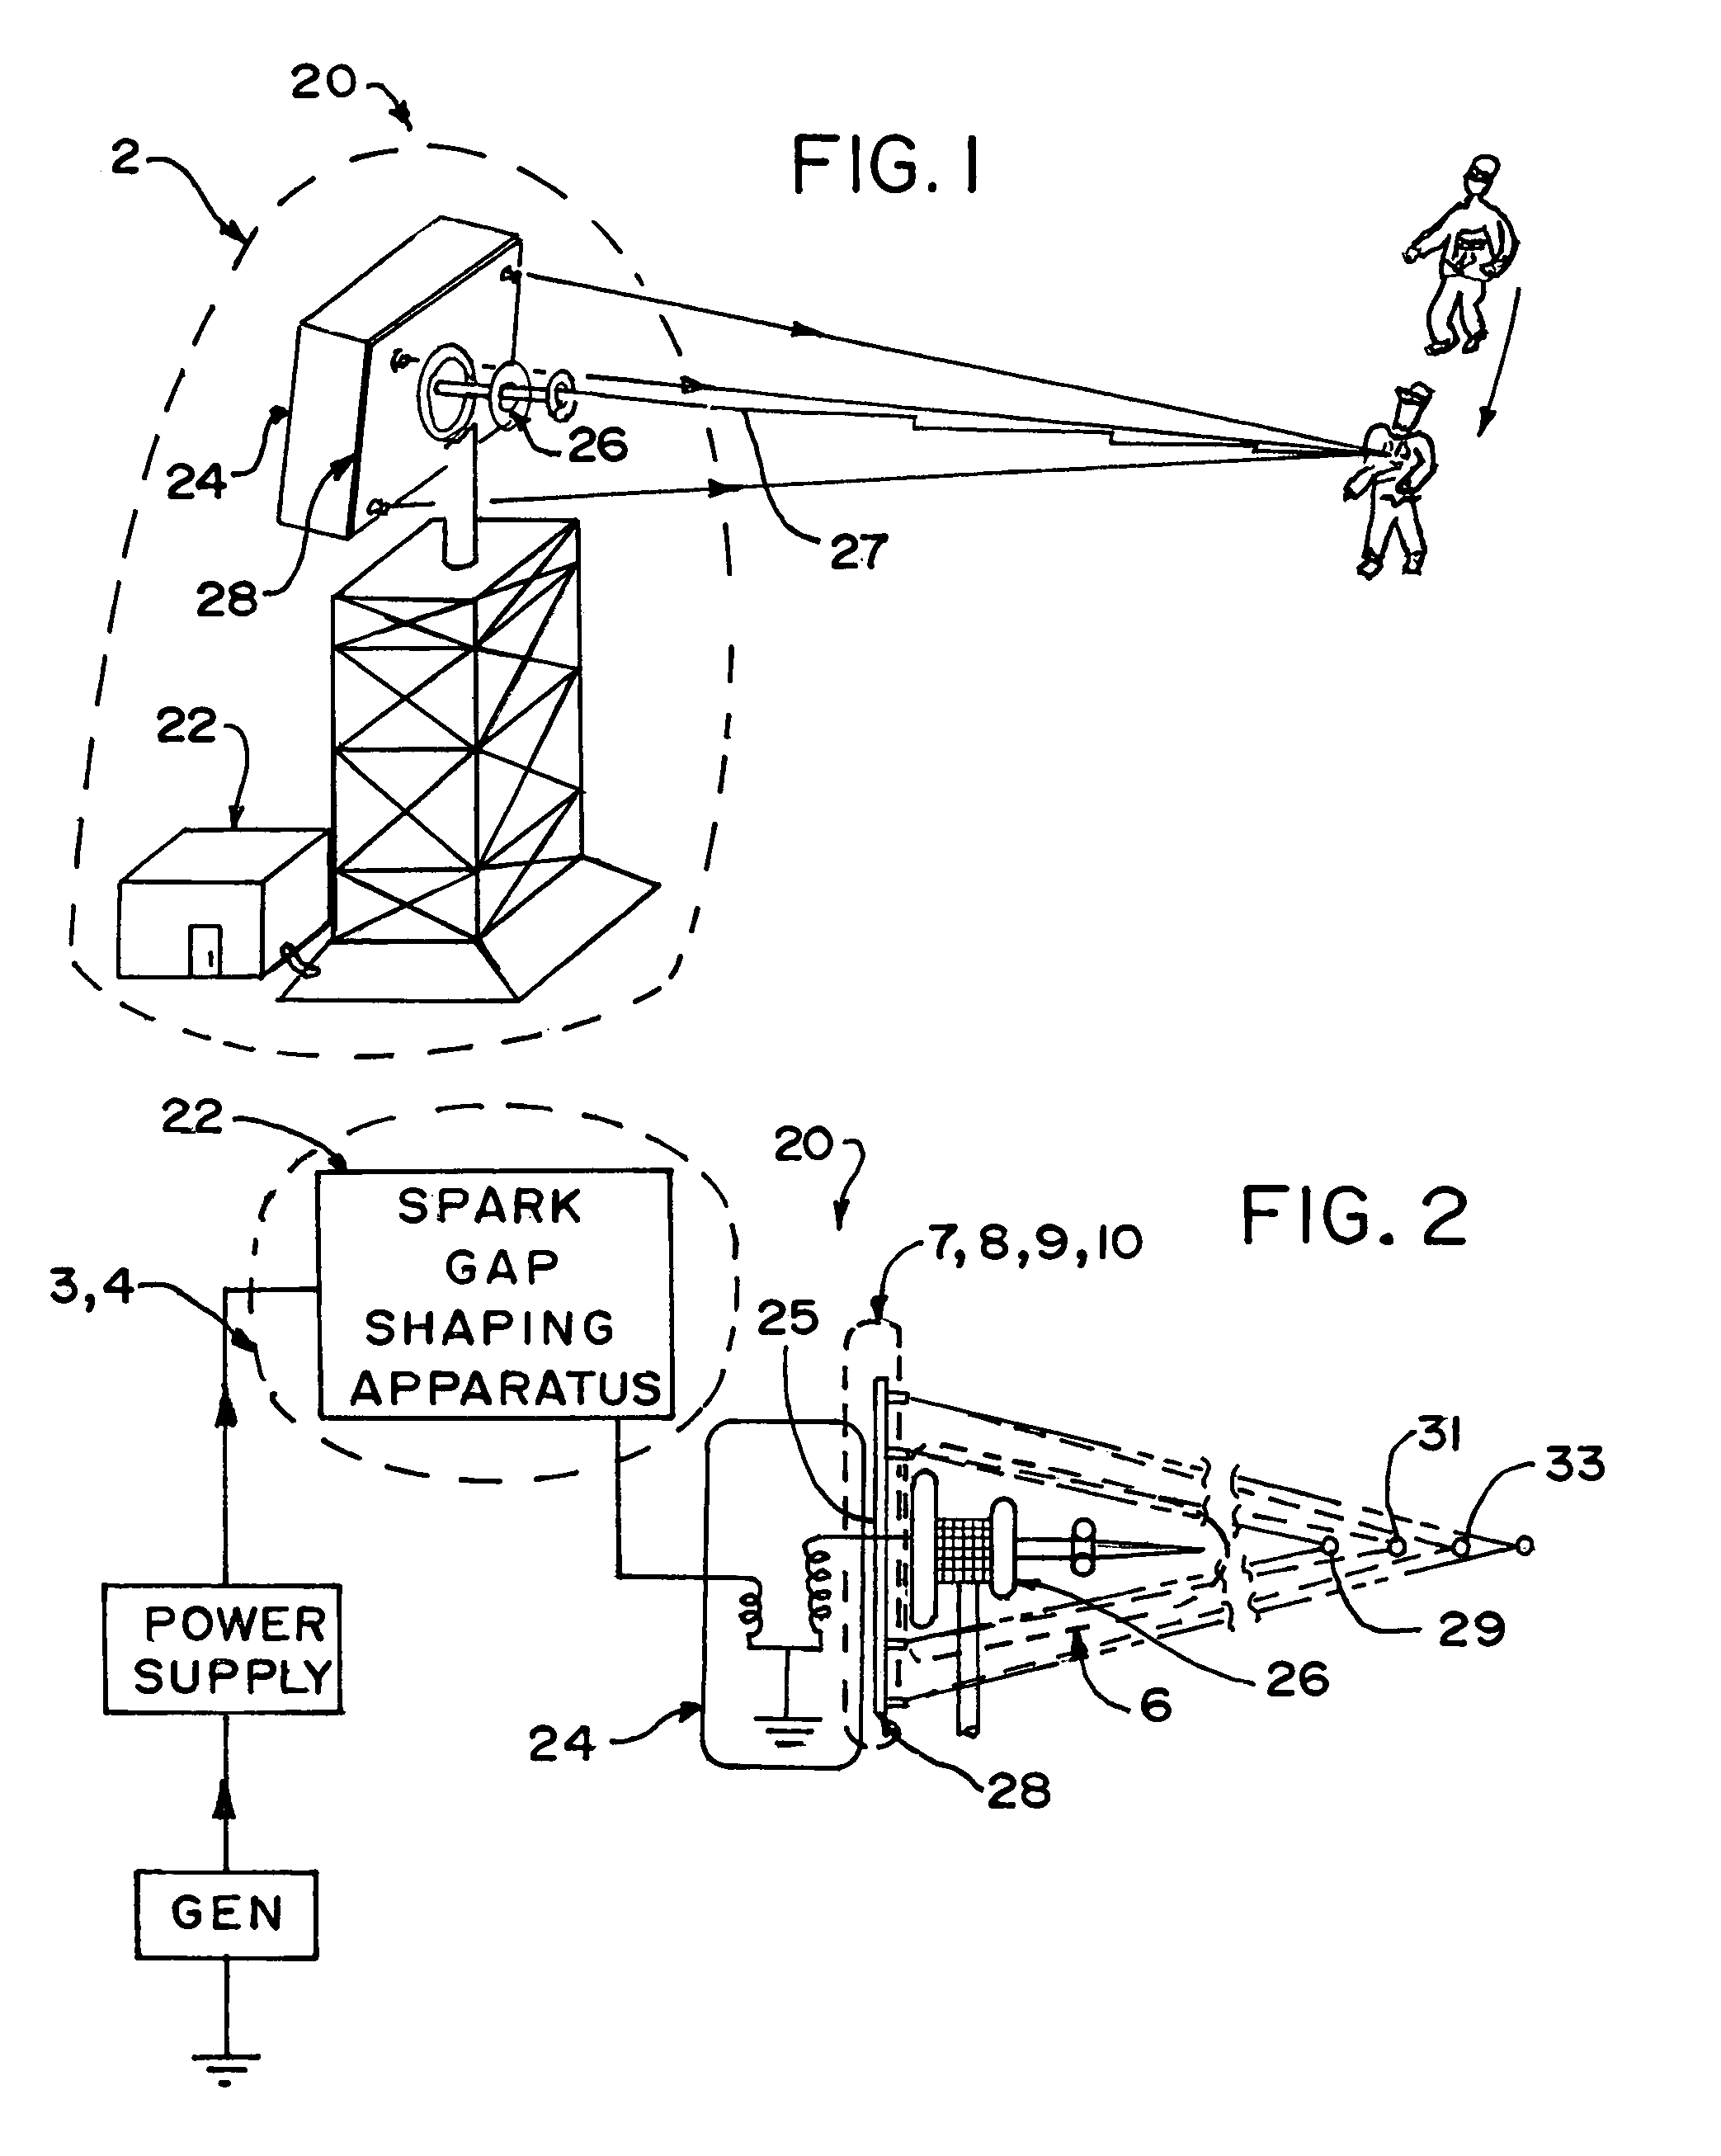 Tunable and aimable artificial lightening producing device